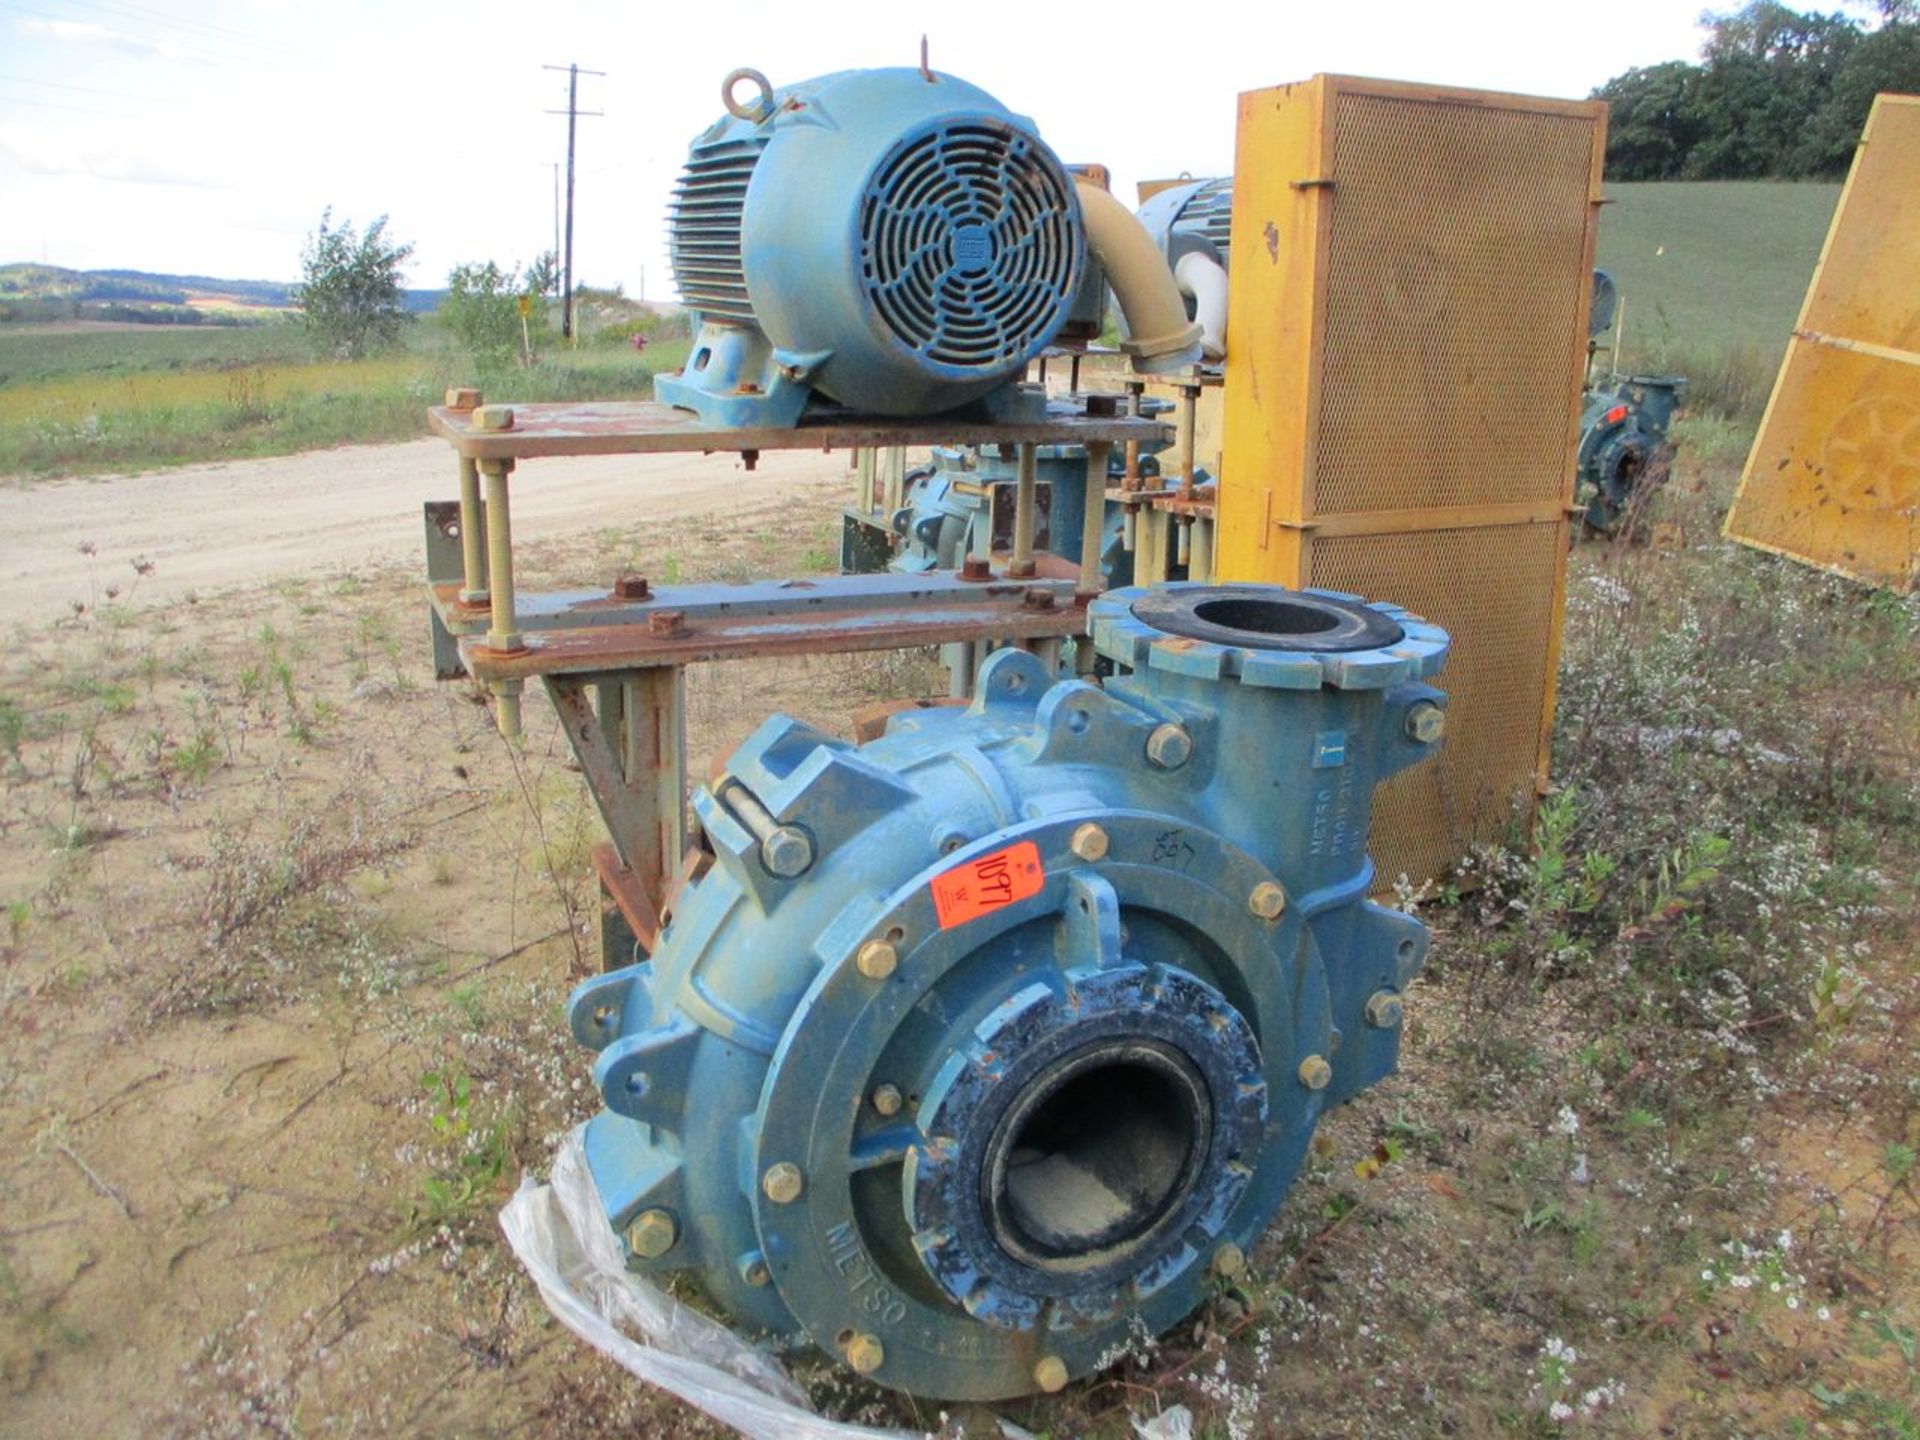 Metso Model HR250, 100 HP Horizontal Slurry Pump, Rubber Lined, 10" Inlet, 8" Outlet (Sold - Subject - Image 2 of 2